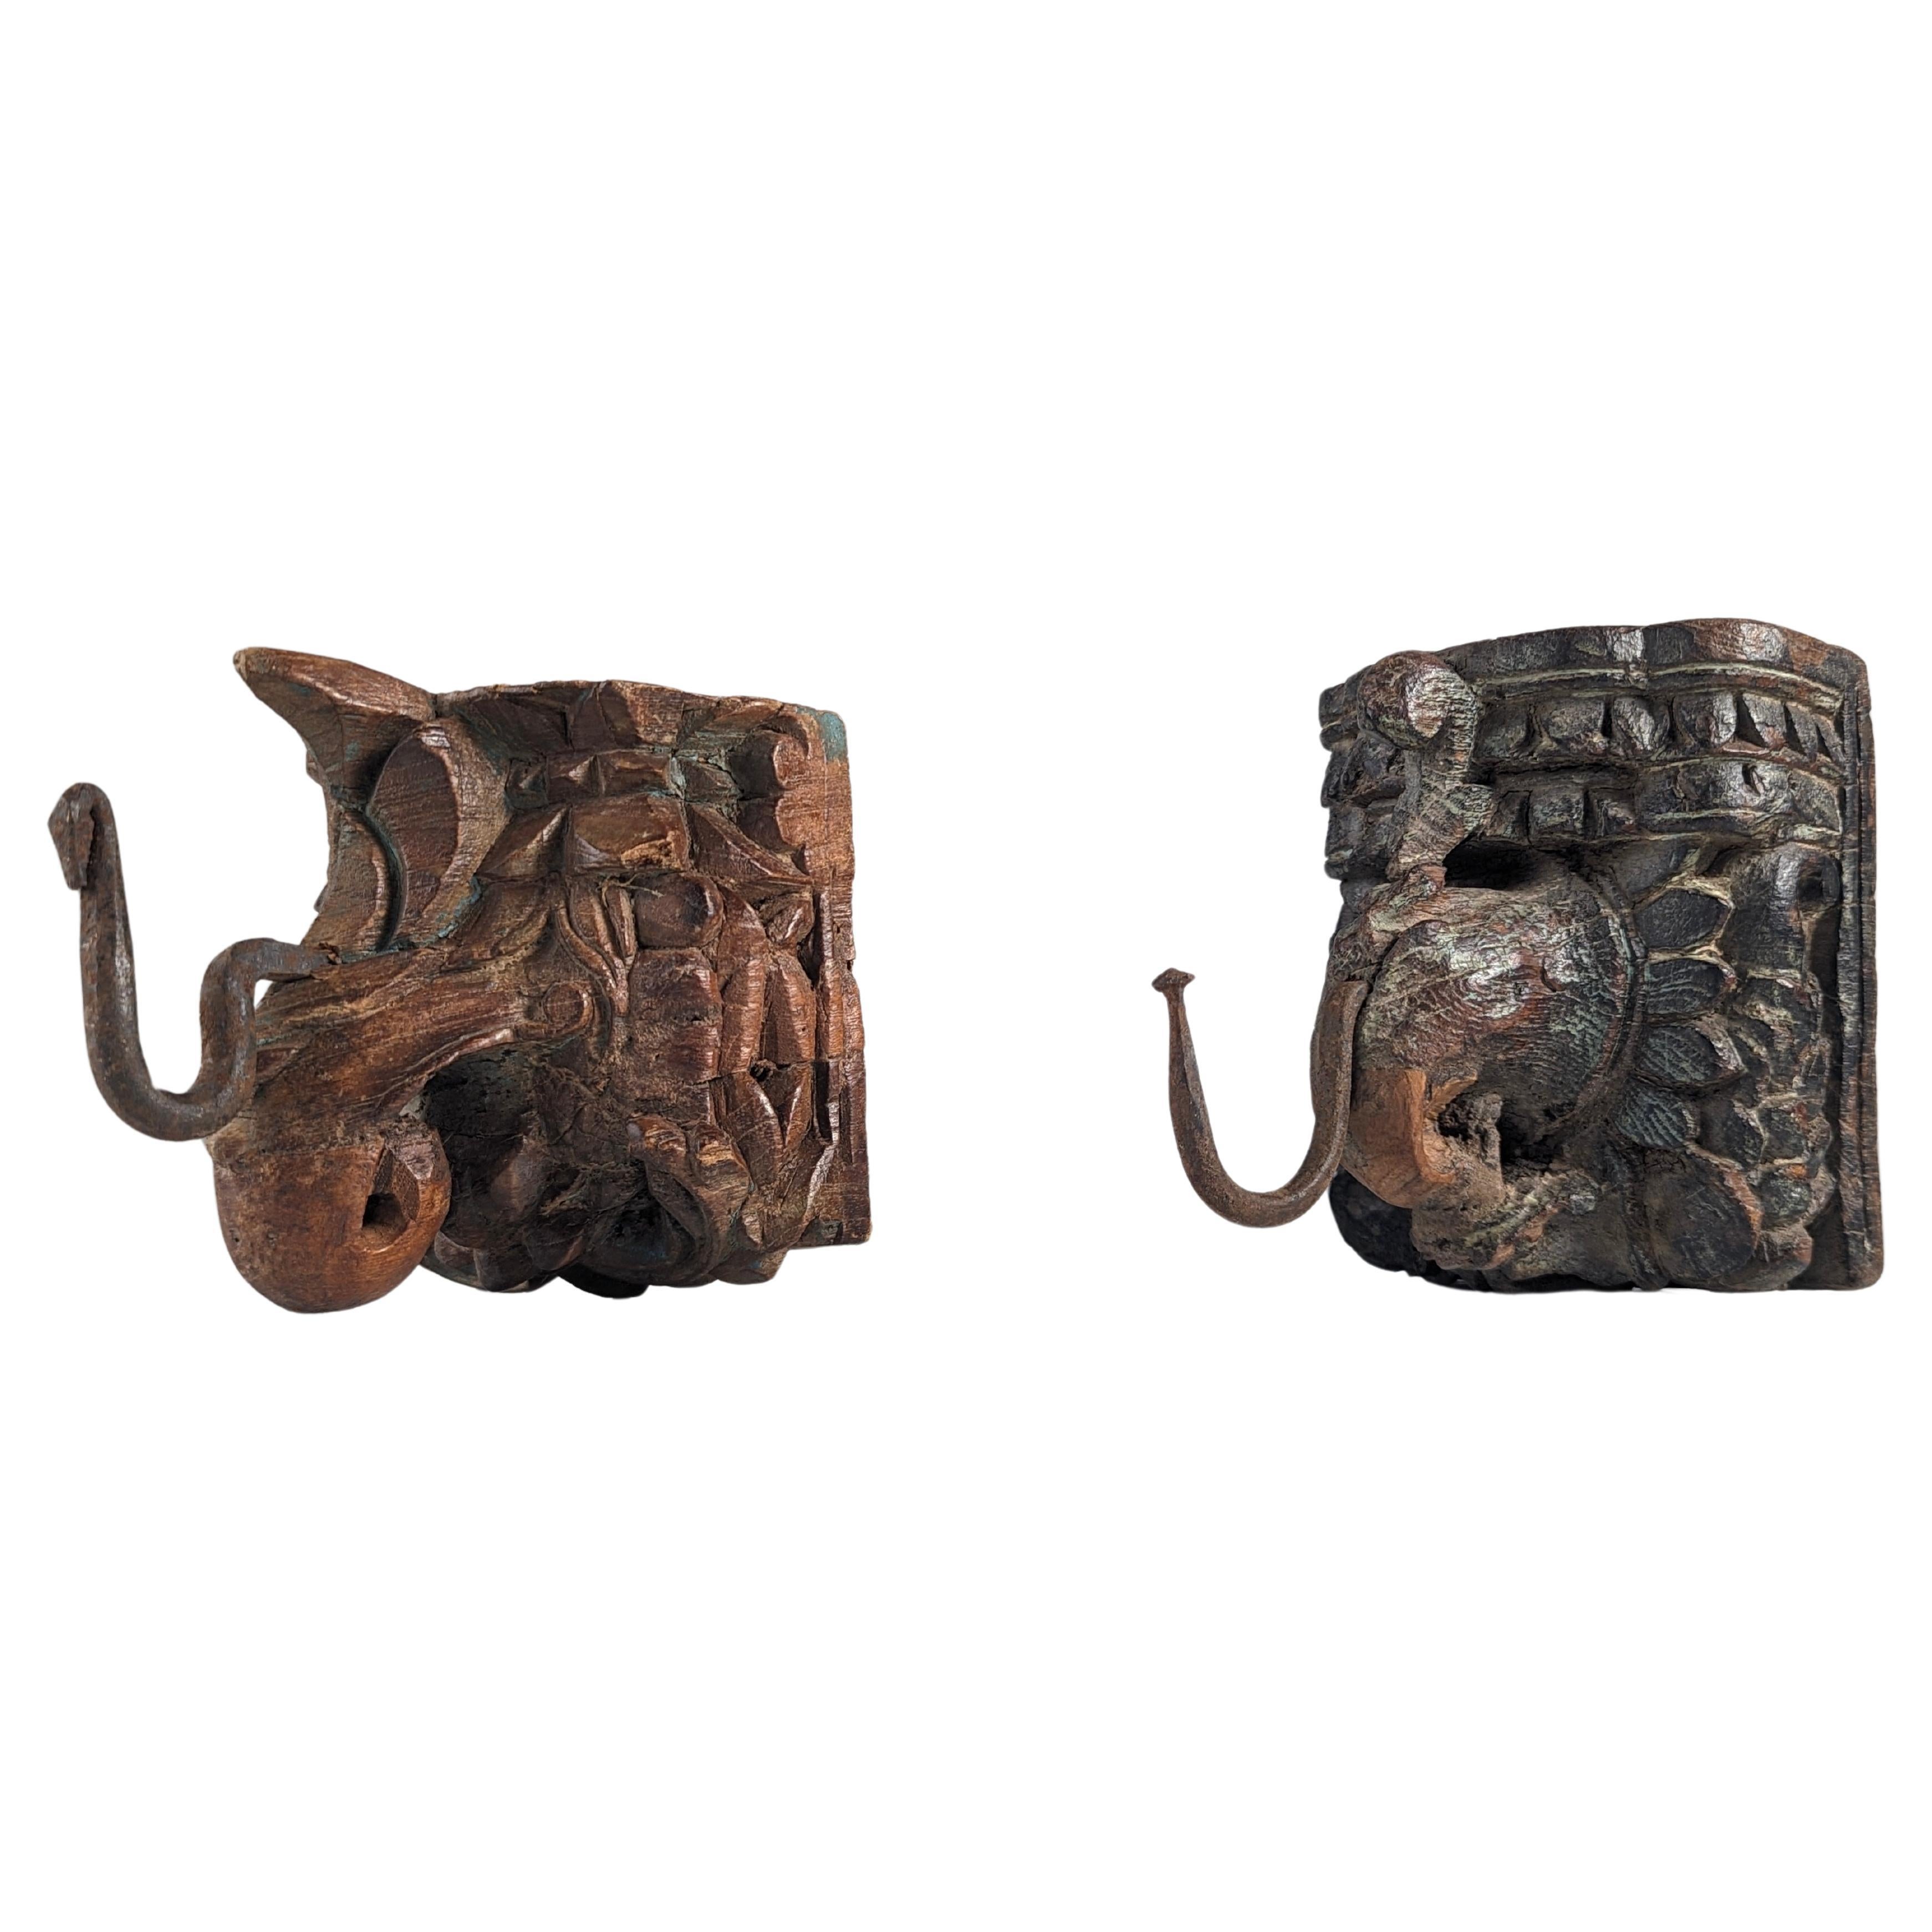 Pair of Antique Wood Carved Elephant Head Hangers, India